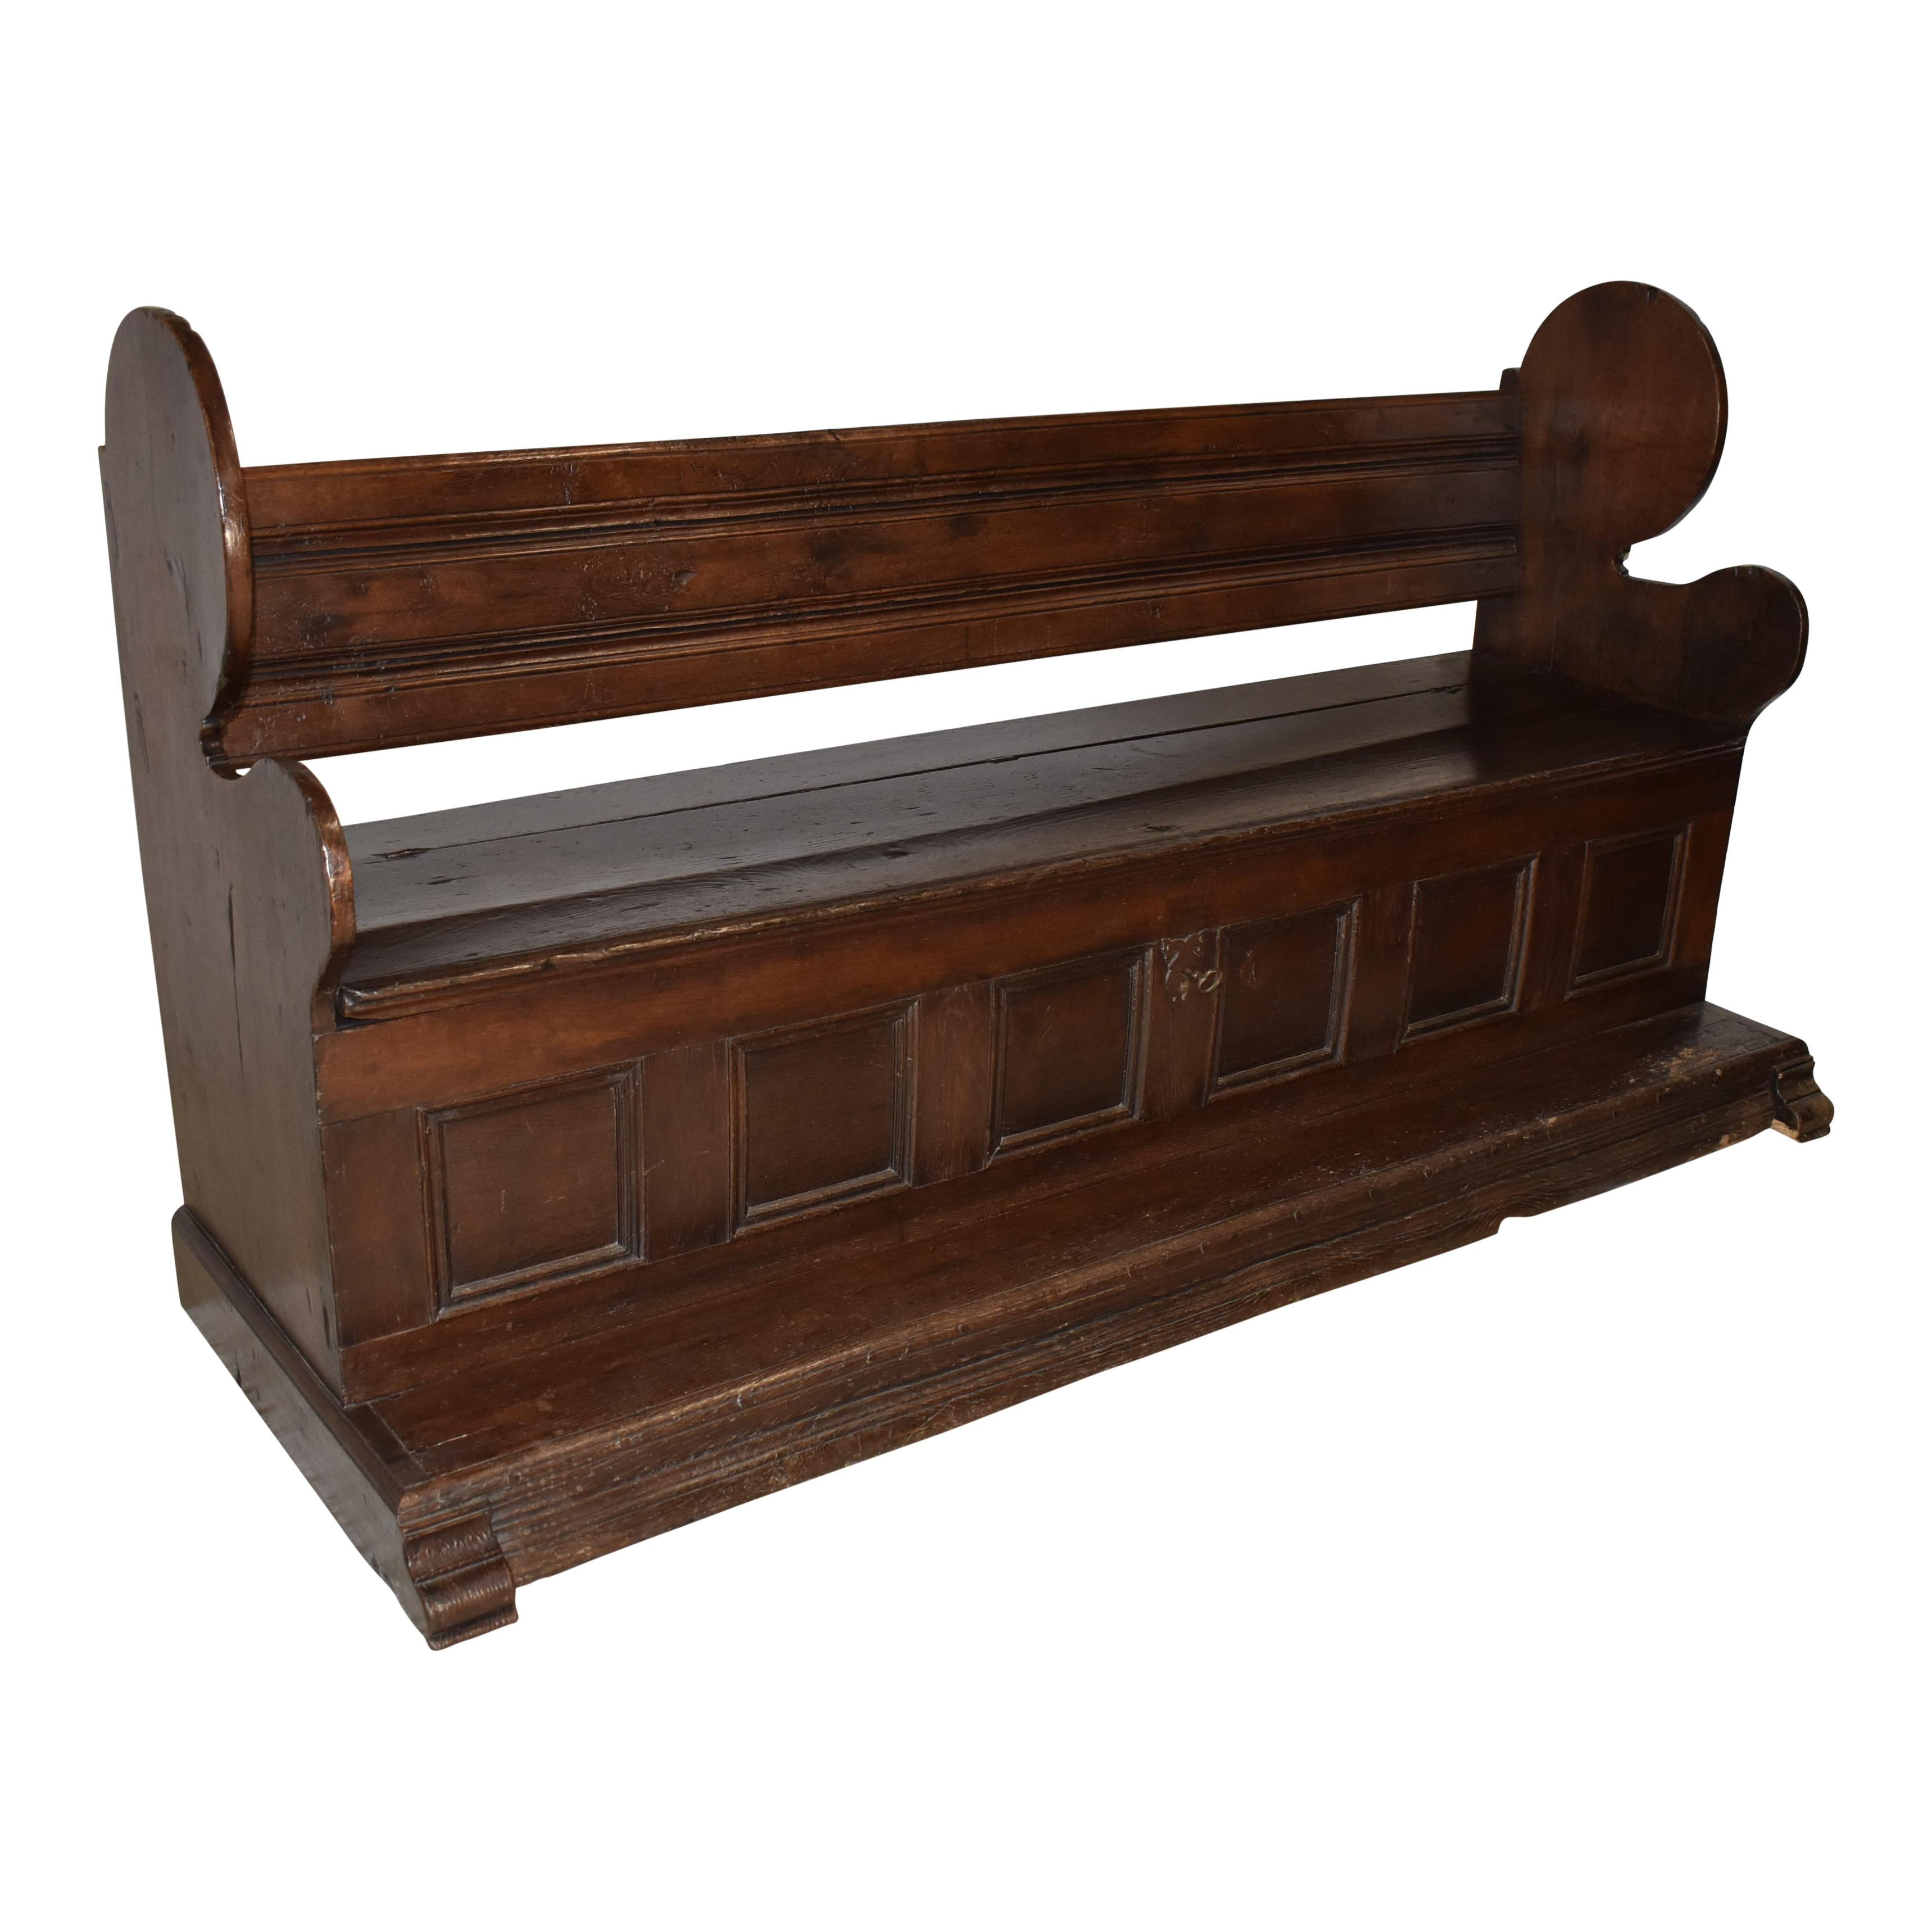 Seating and storage abound in this rustic bench from Belgium. Crafted in the late-19th century from roughly hewn oak, it has all the look of age-worn stability and rugged reliability. With a wide backrest that is supported by shaped side wings, the